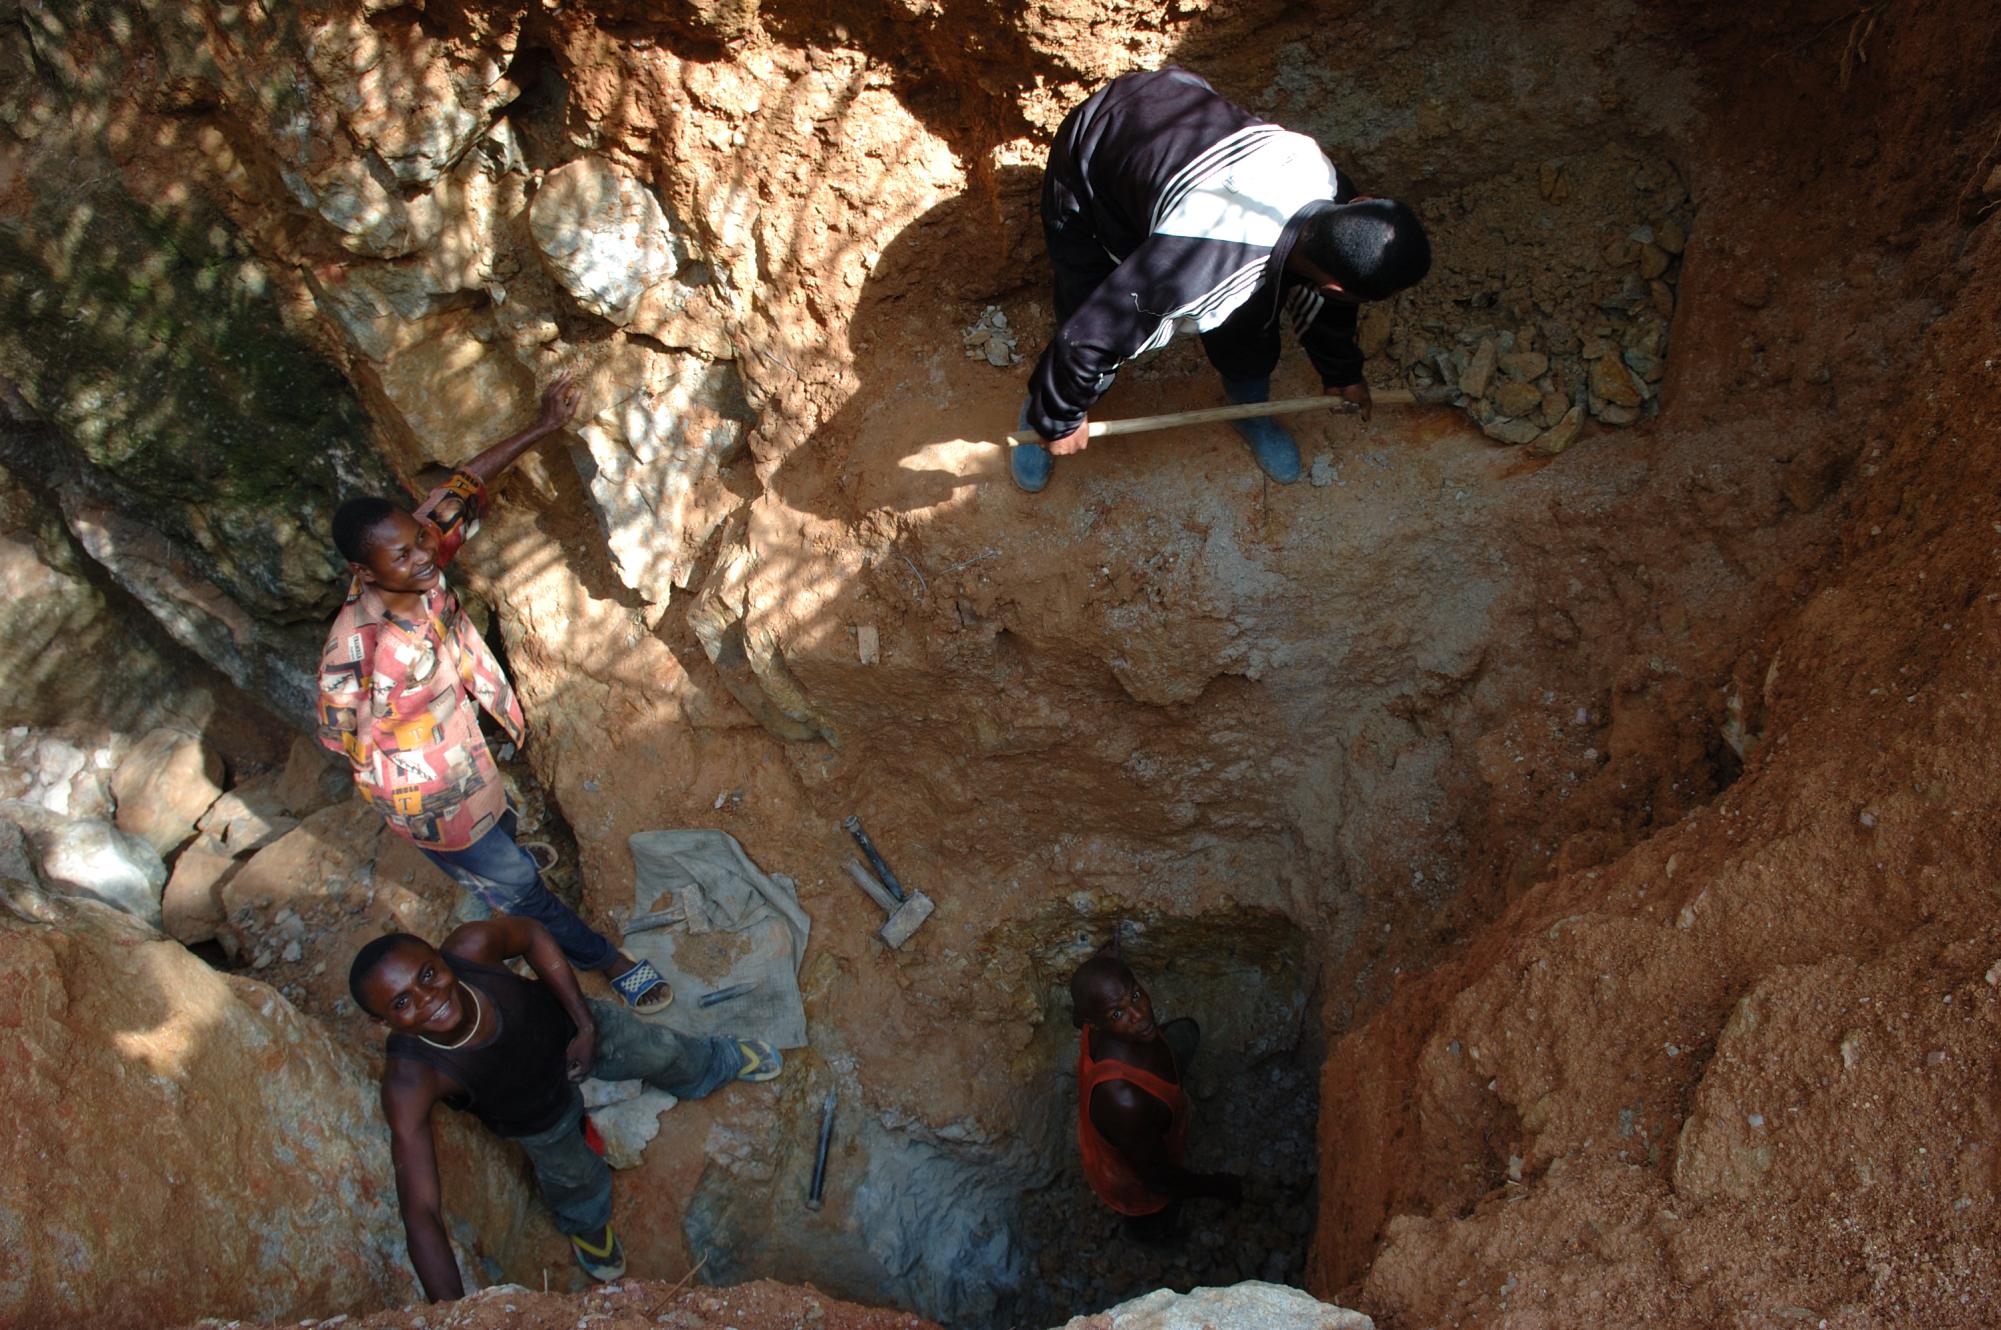 Cobalt miners find themselves in deep pits of the mines for all hours of the day. “It’s a shocking situation, but I can’t leave the job because there is no other choice,” says a miner. The starvation on their faces saddens people across the world.